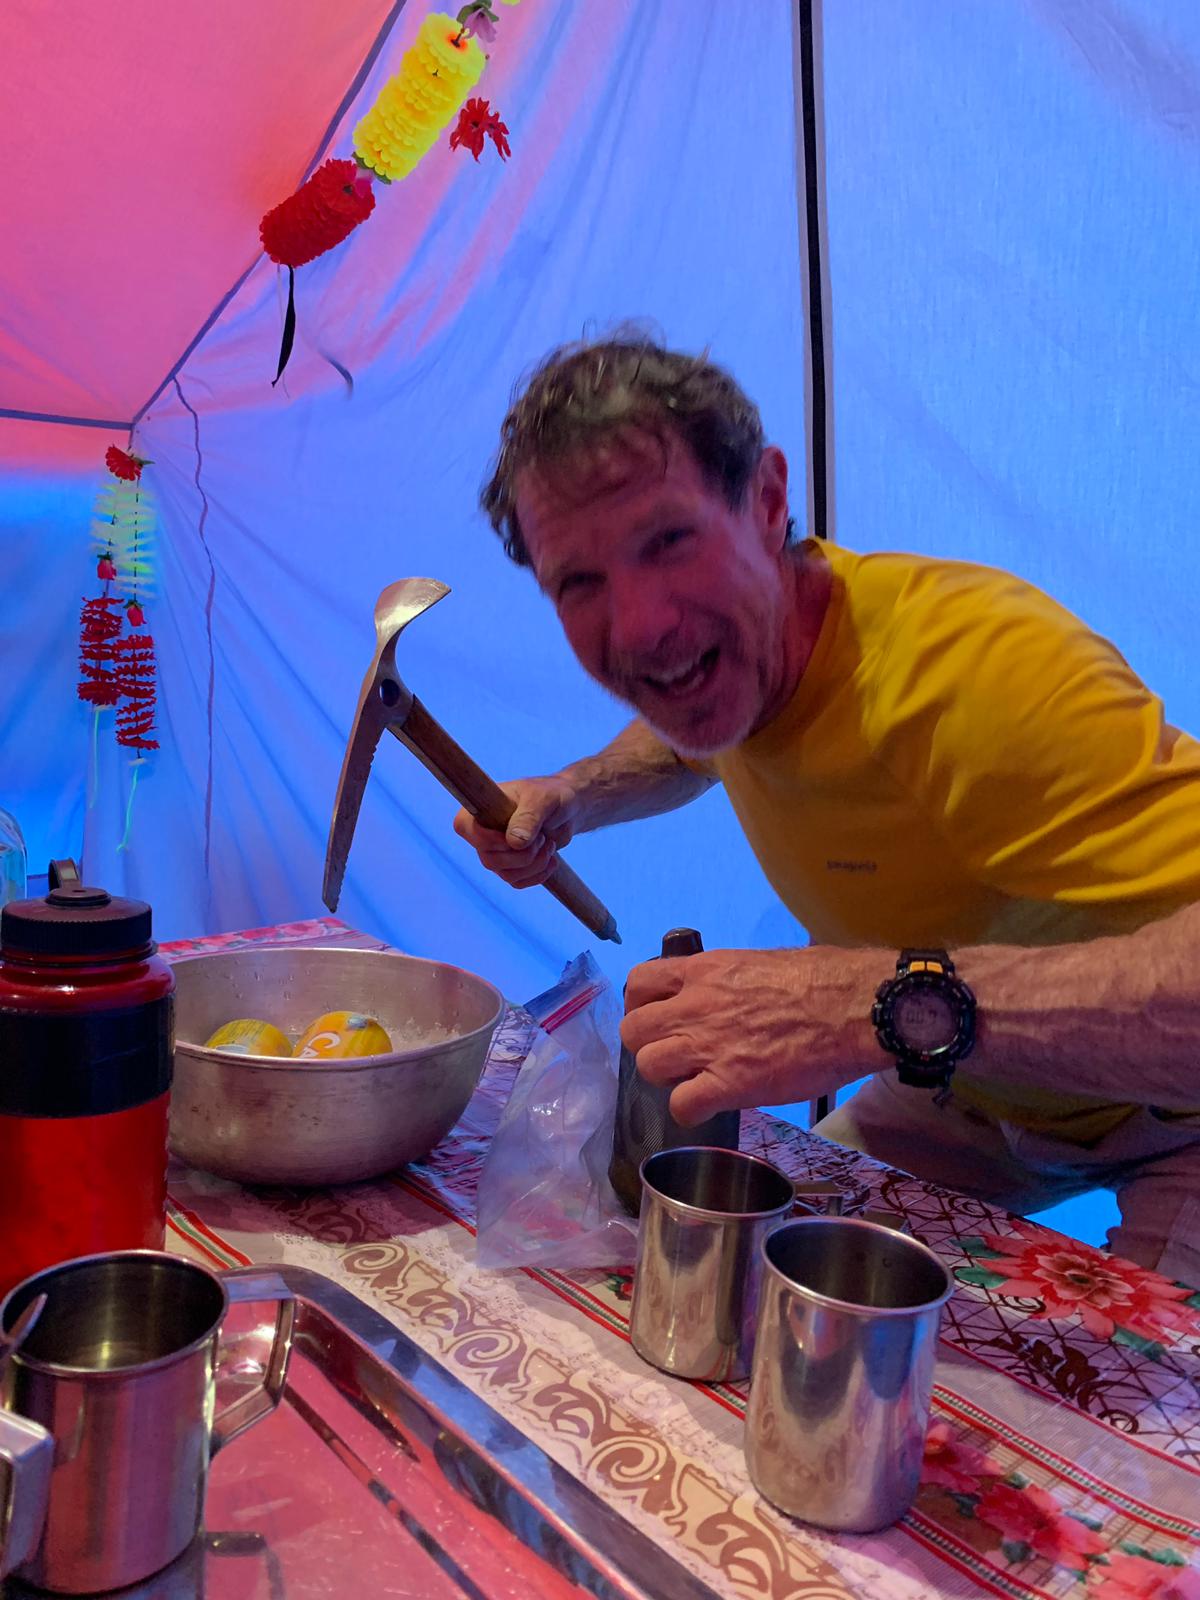 Rick chipping ice with a wooden ice axe, for gin and tonics in base camp